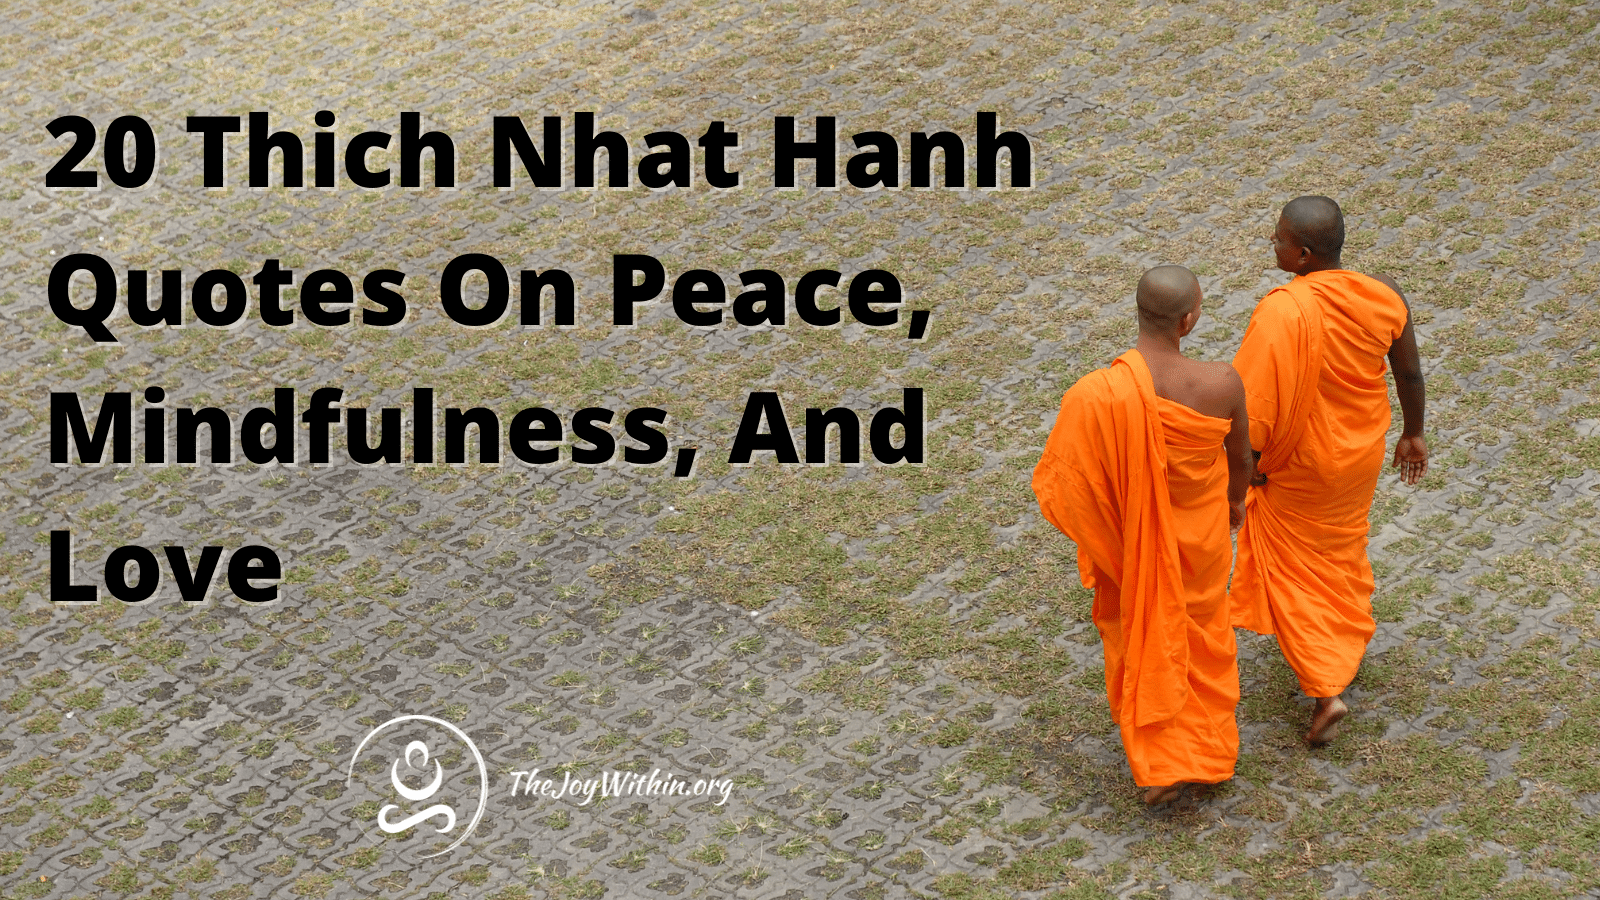 You are currently viewing 20 Thich Nhat Hanh Quotes on Peace, Mindfulness, And Love